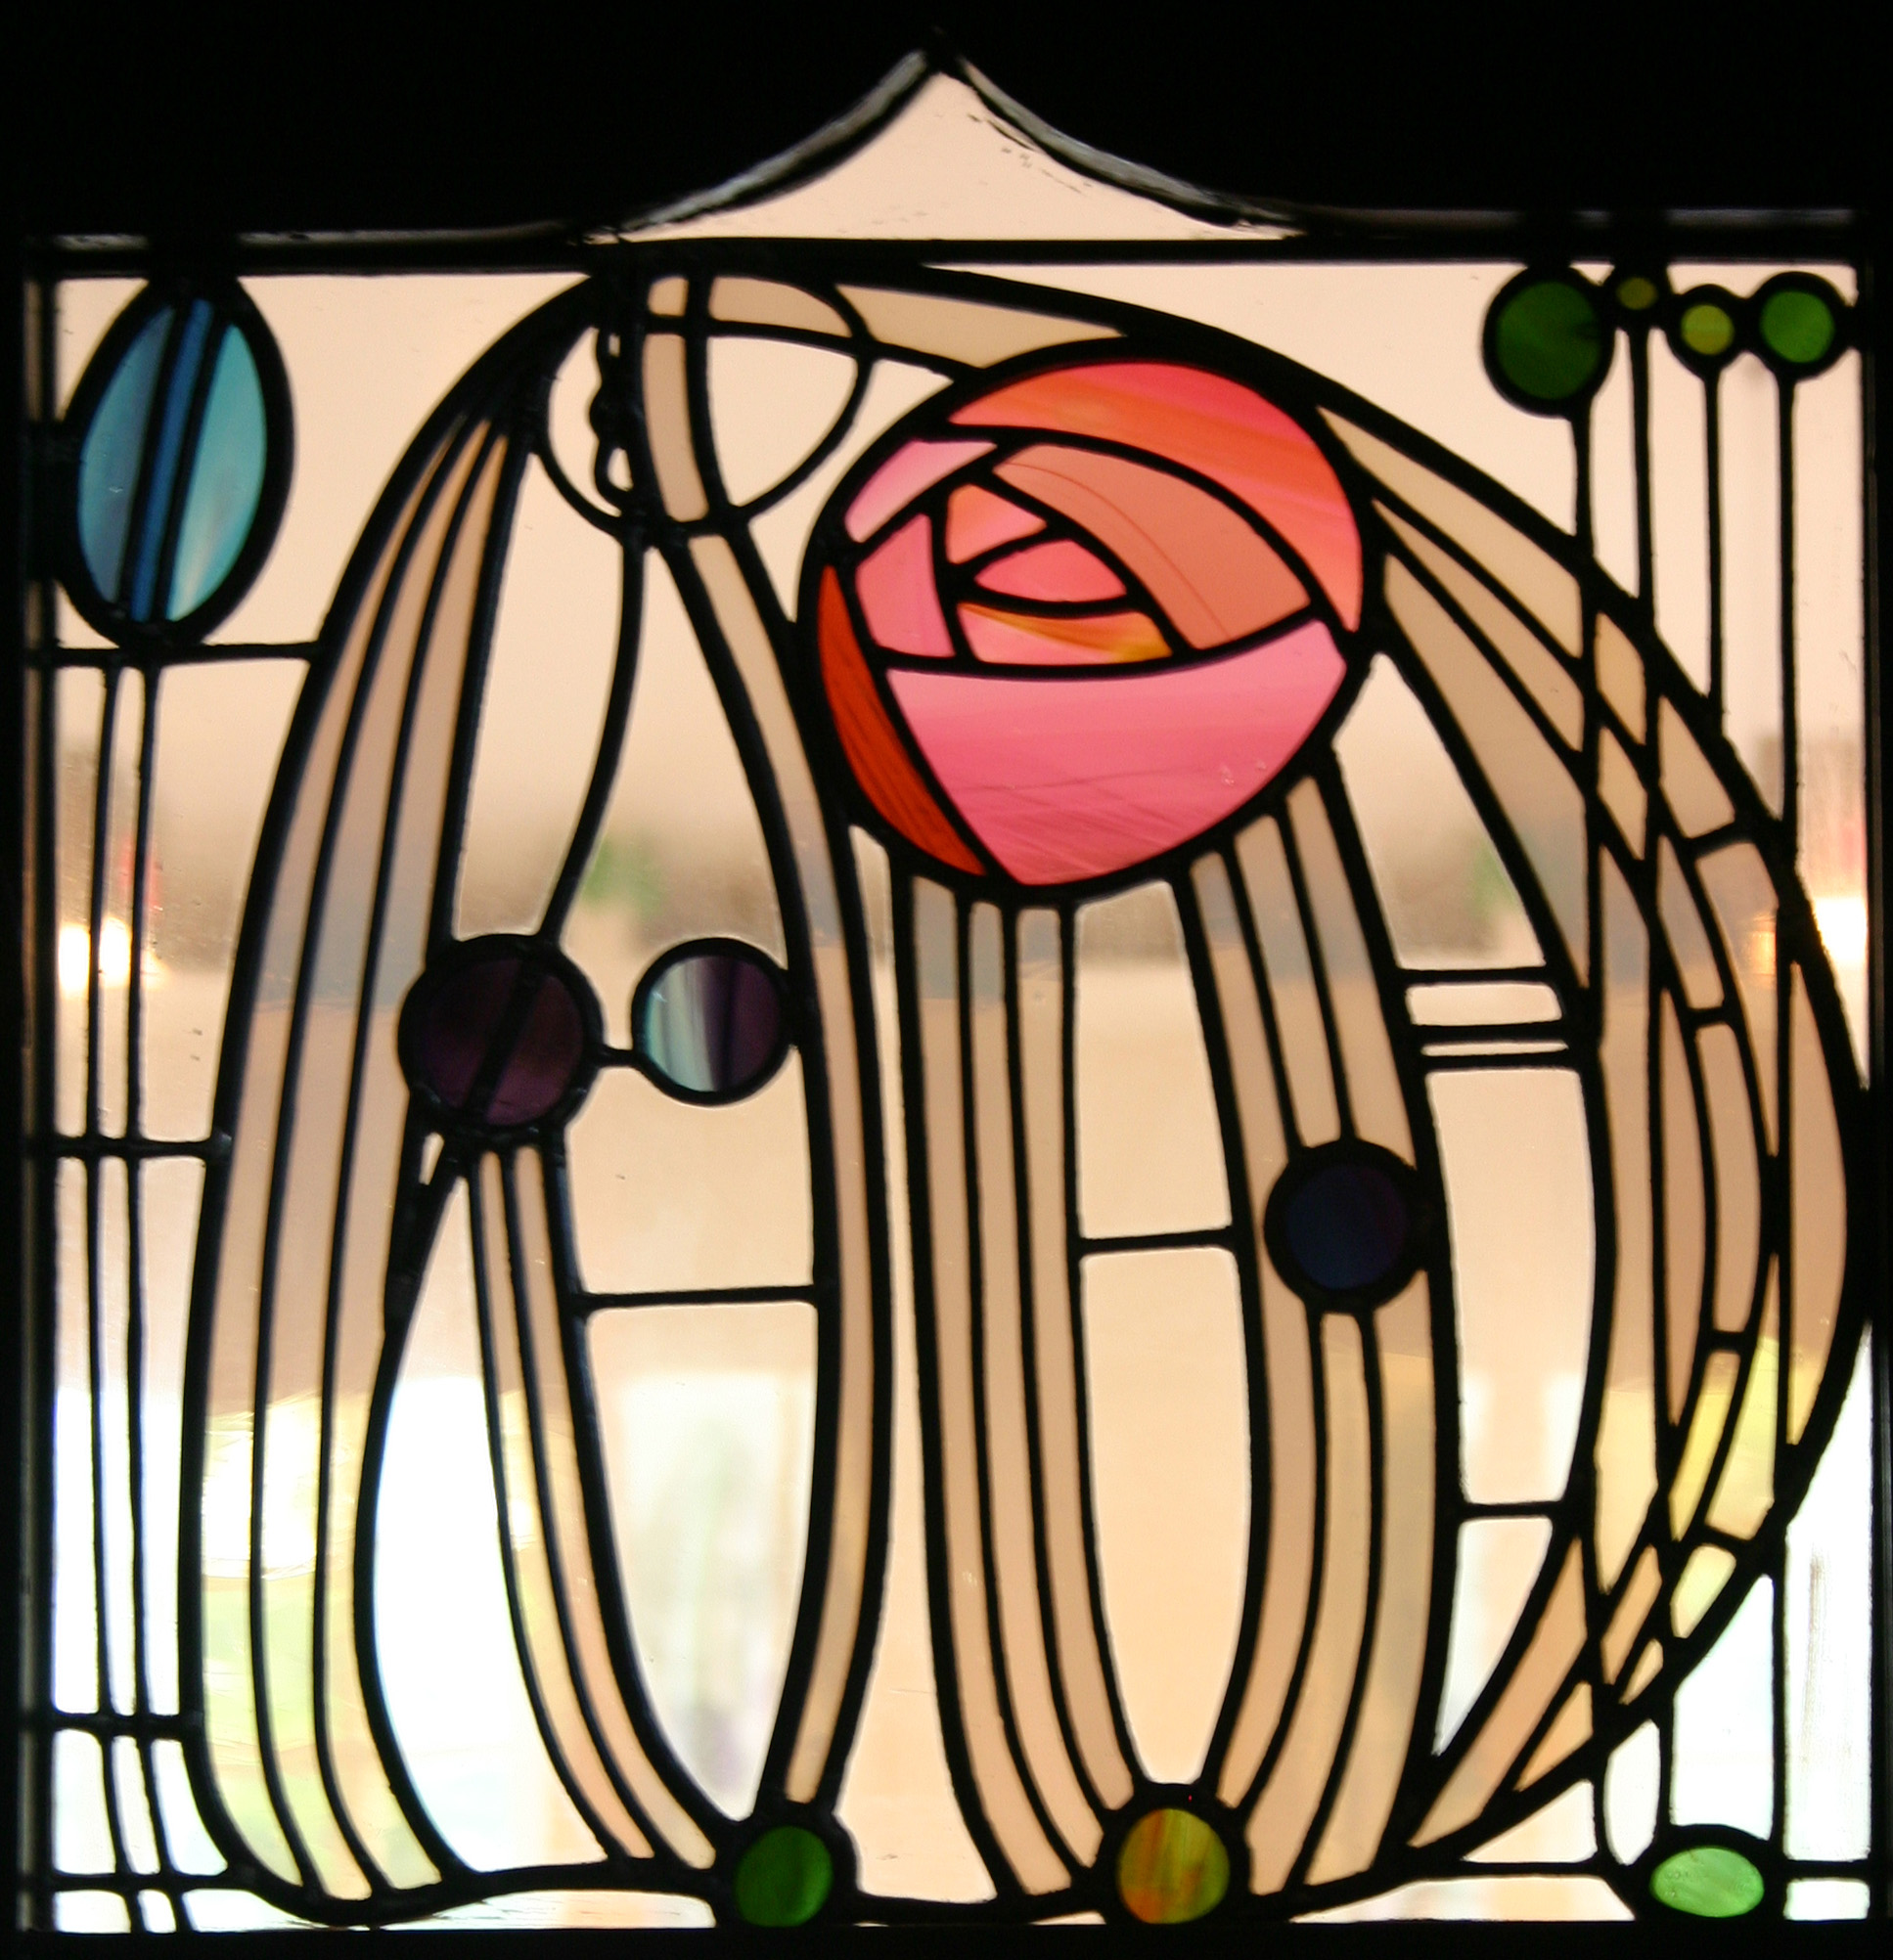 A stylistic detail of a stained glass window with various organic and structured lines and borders.